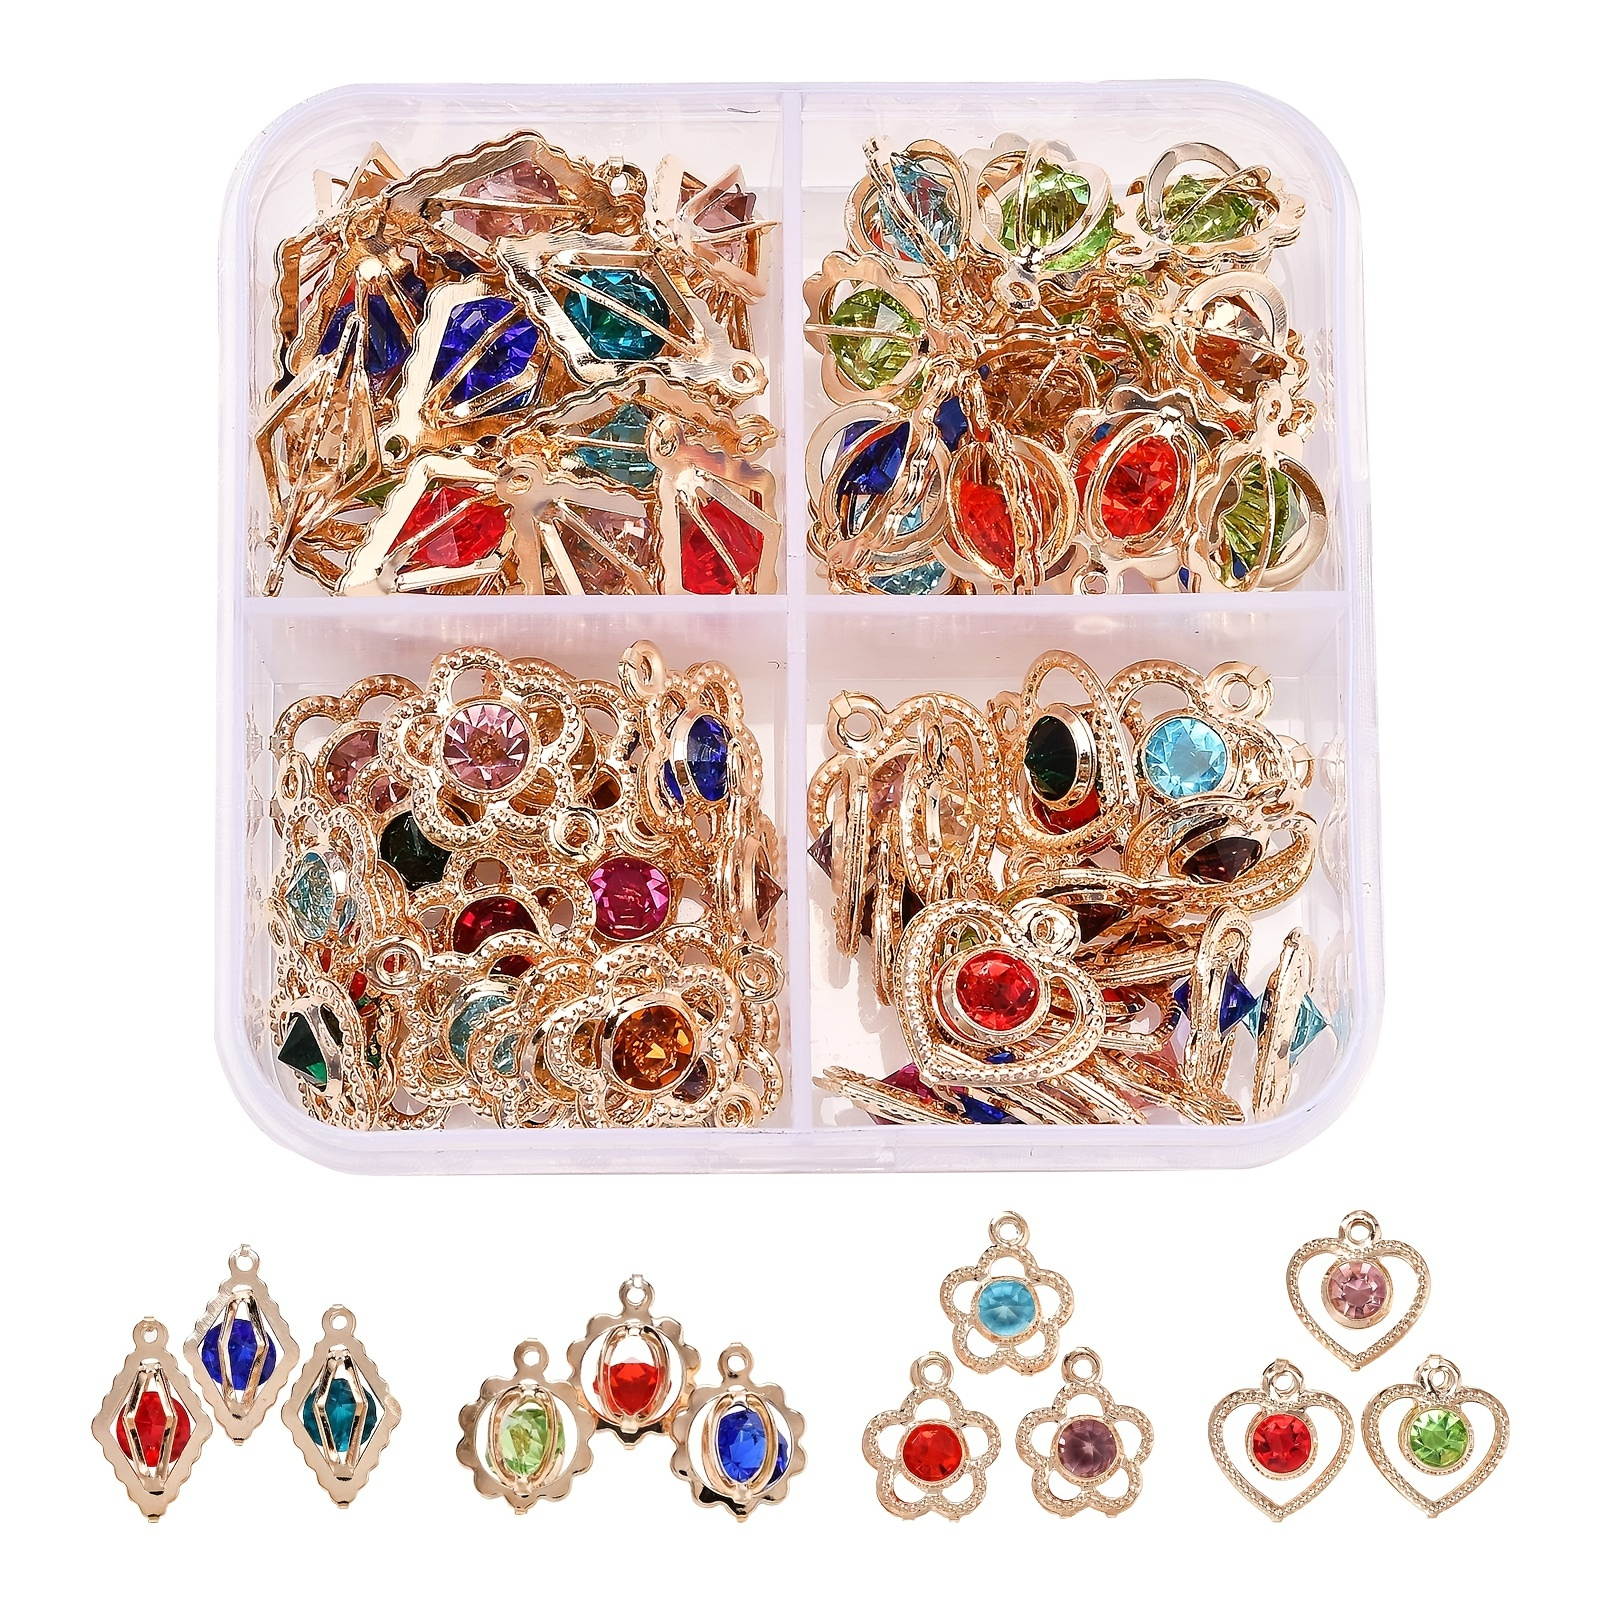 

80 Mixed Alloy Pendants With Rhinestones For Earrings, Bracelets And Necklaces